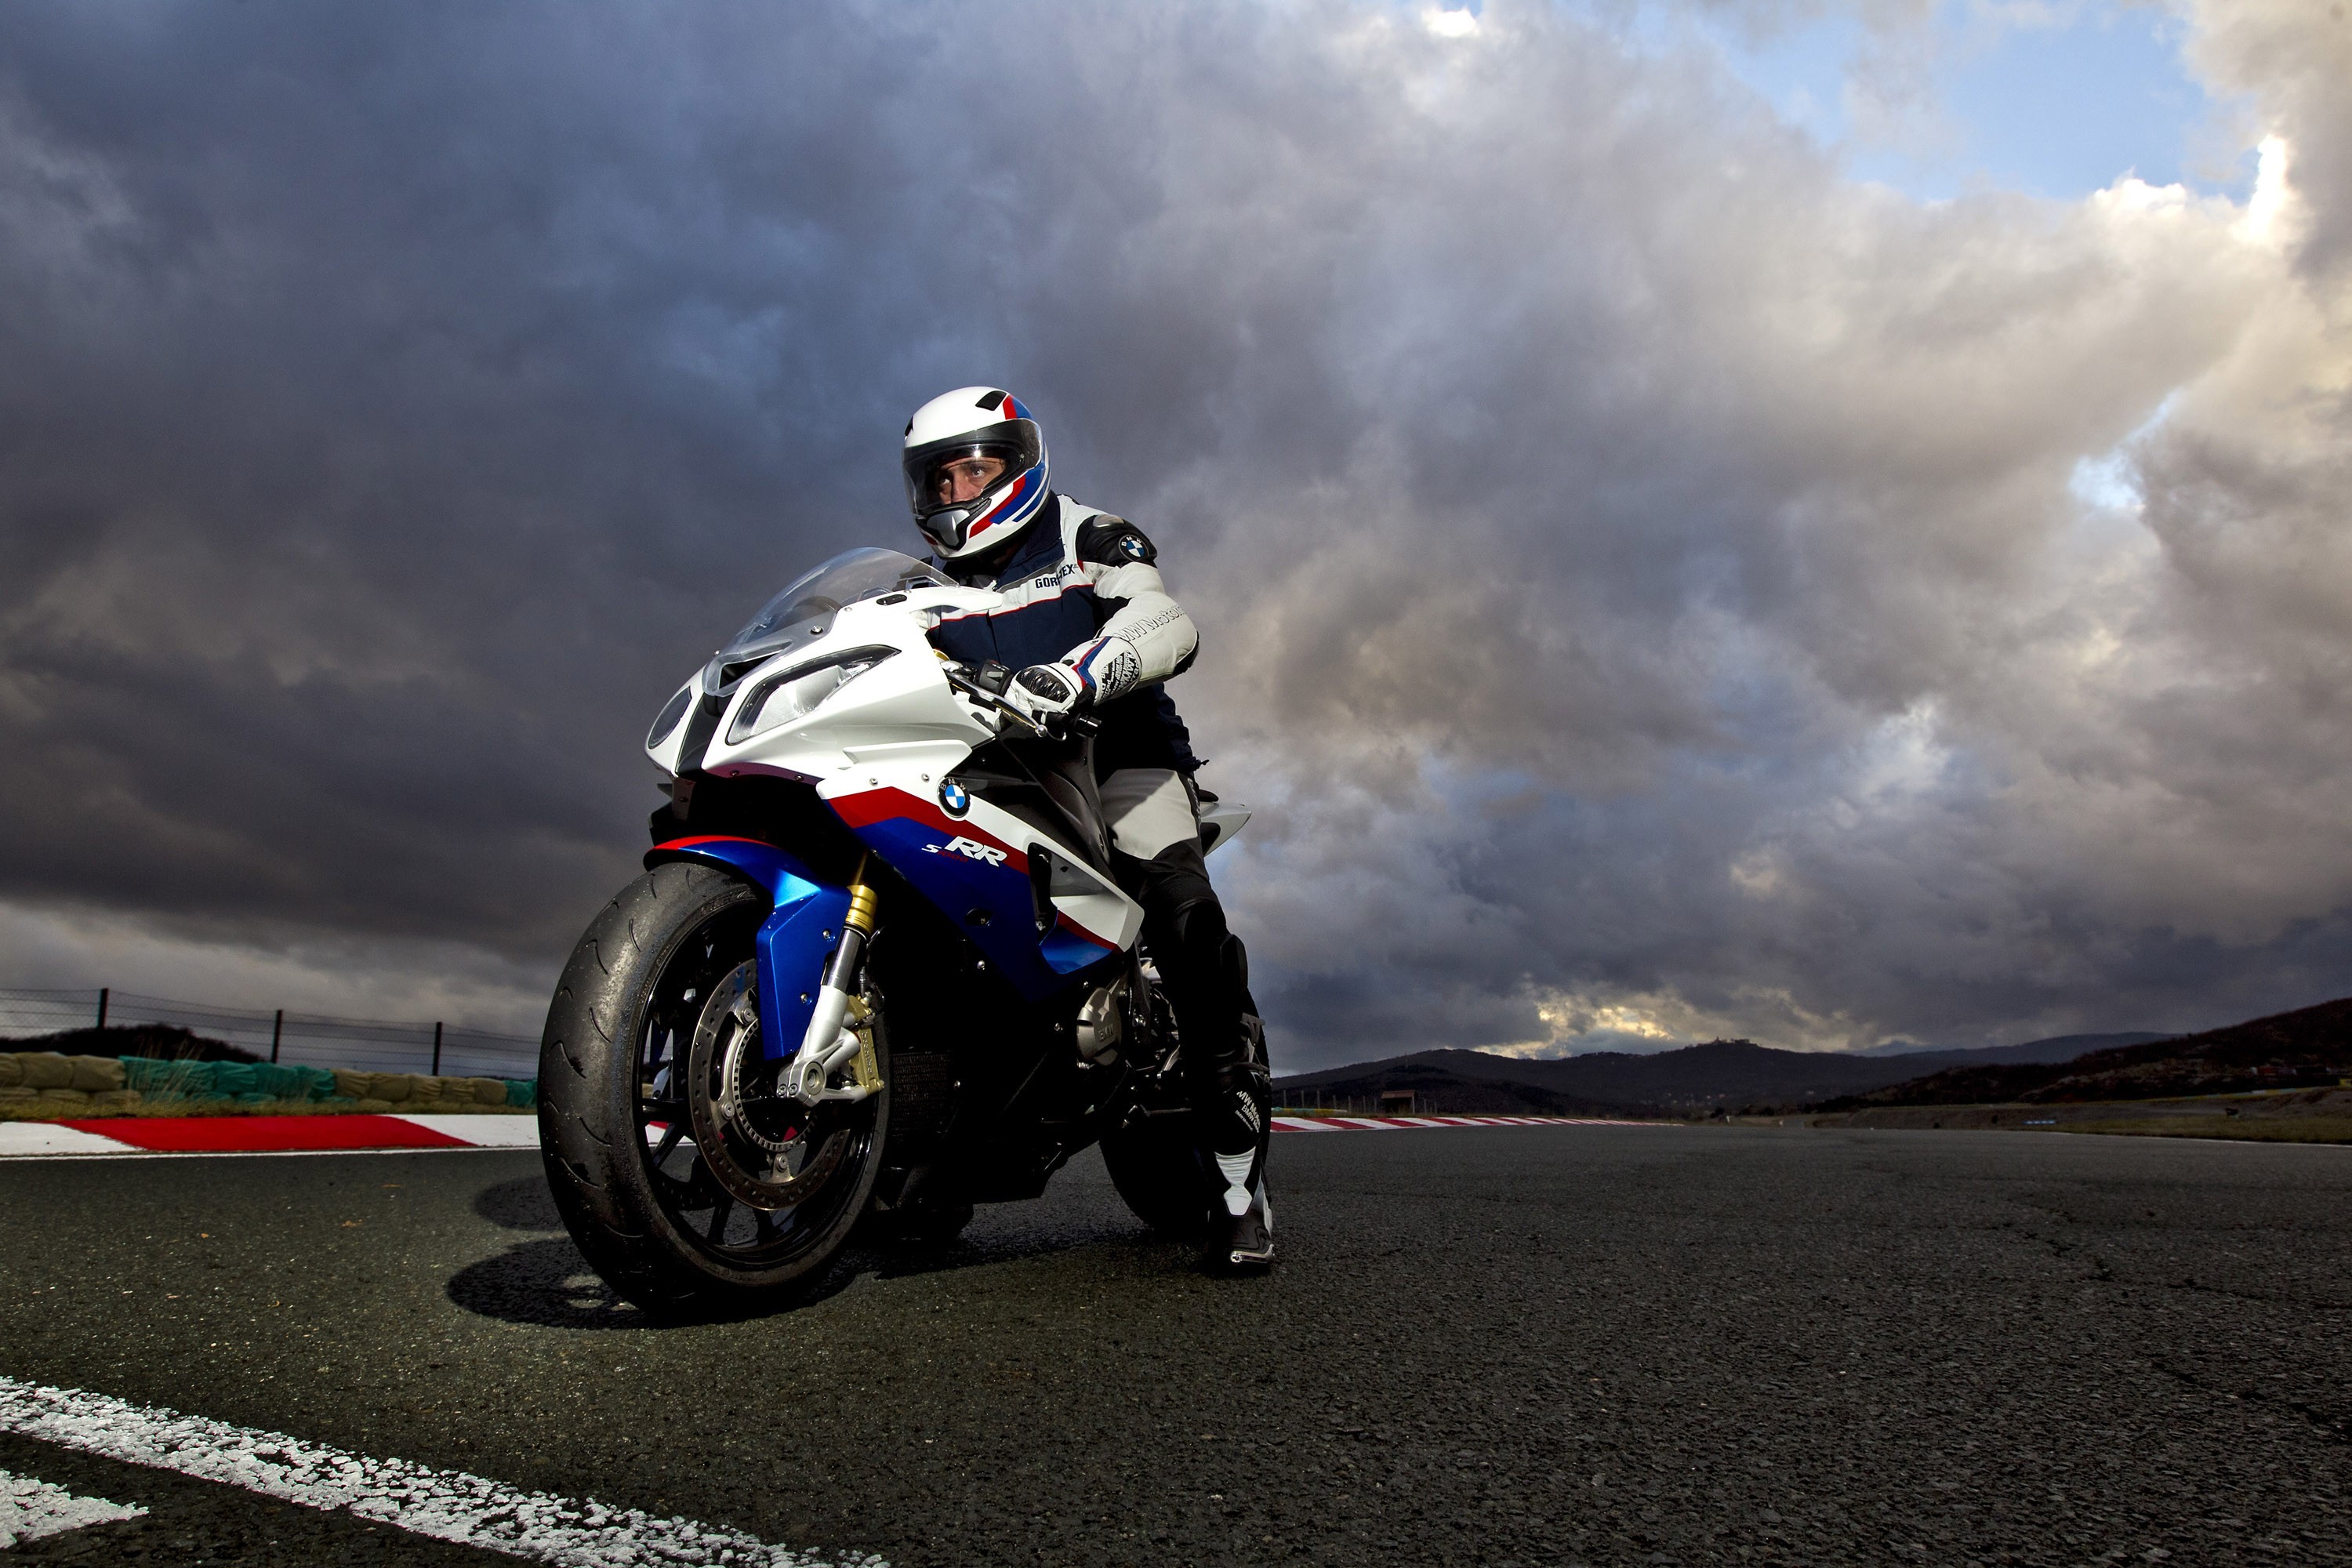 Bmw S1000rr Hd Wallpaper For Mobile